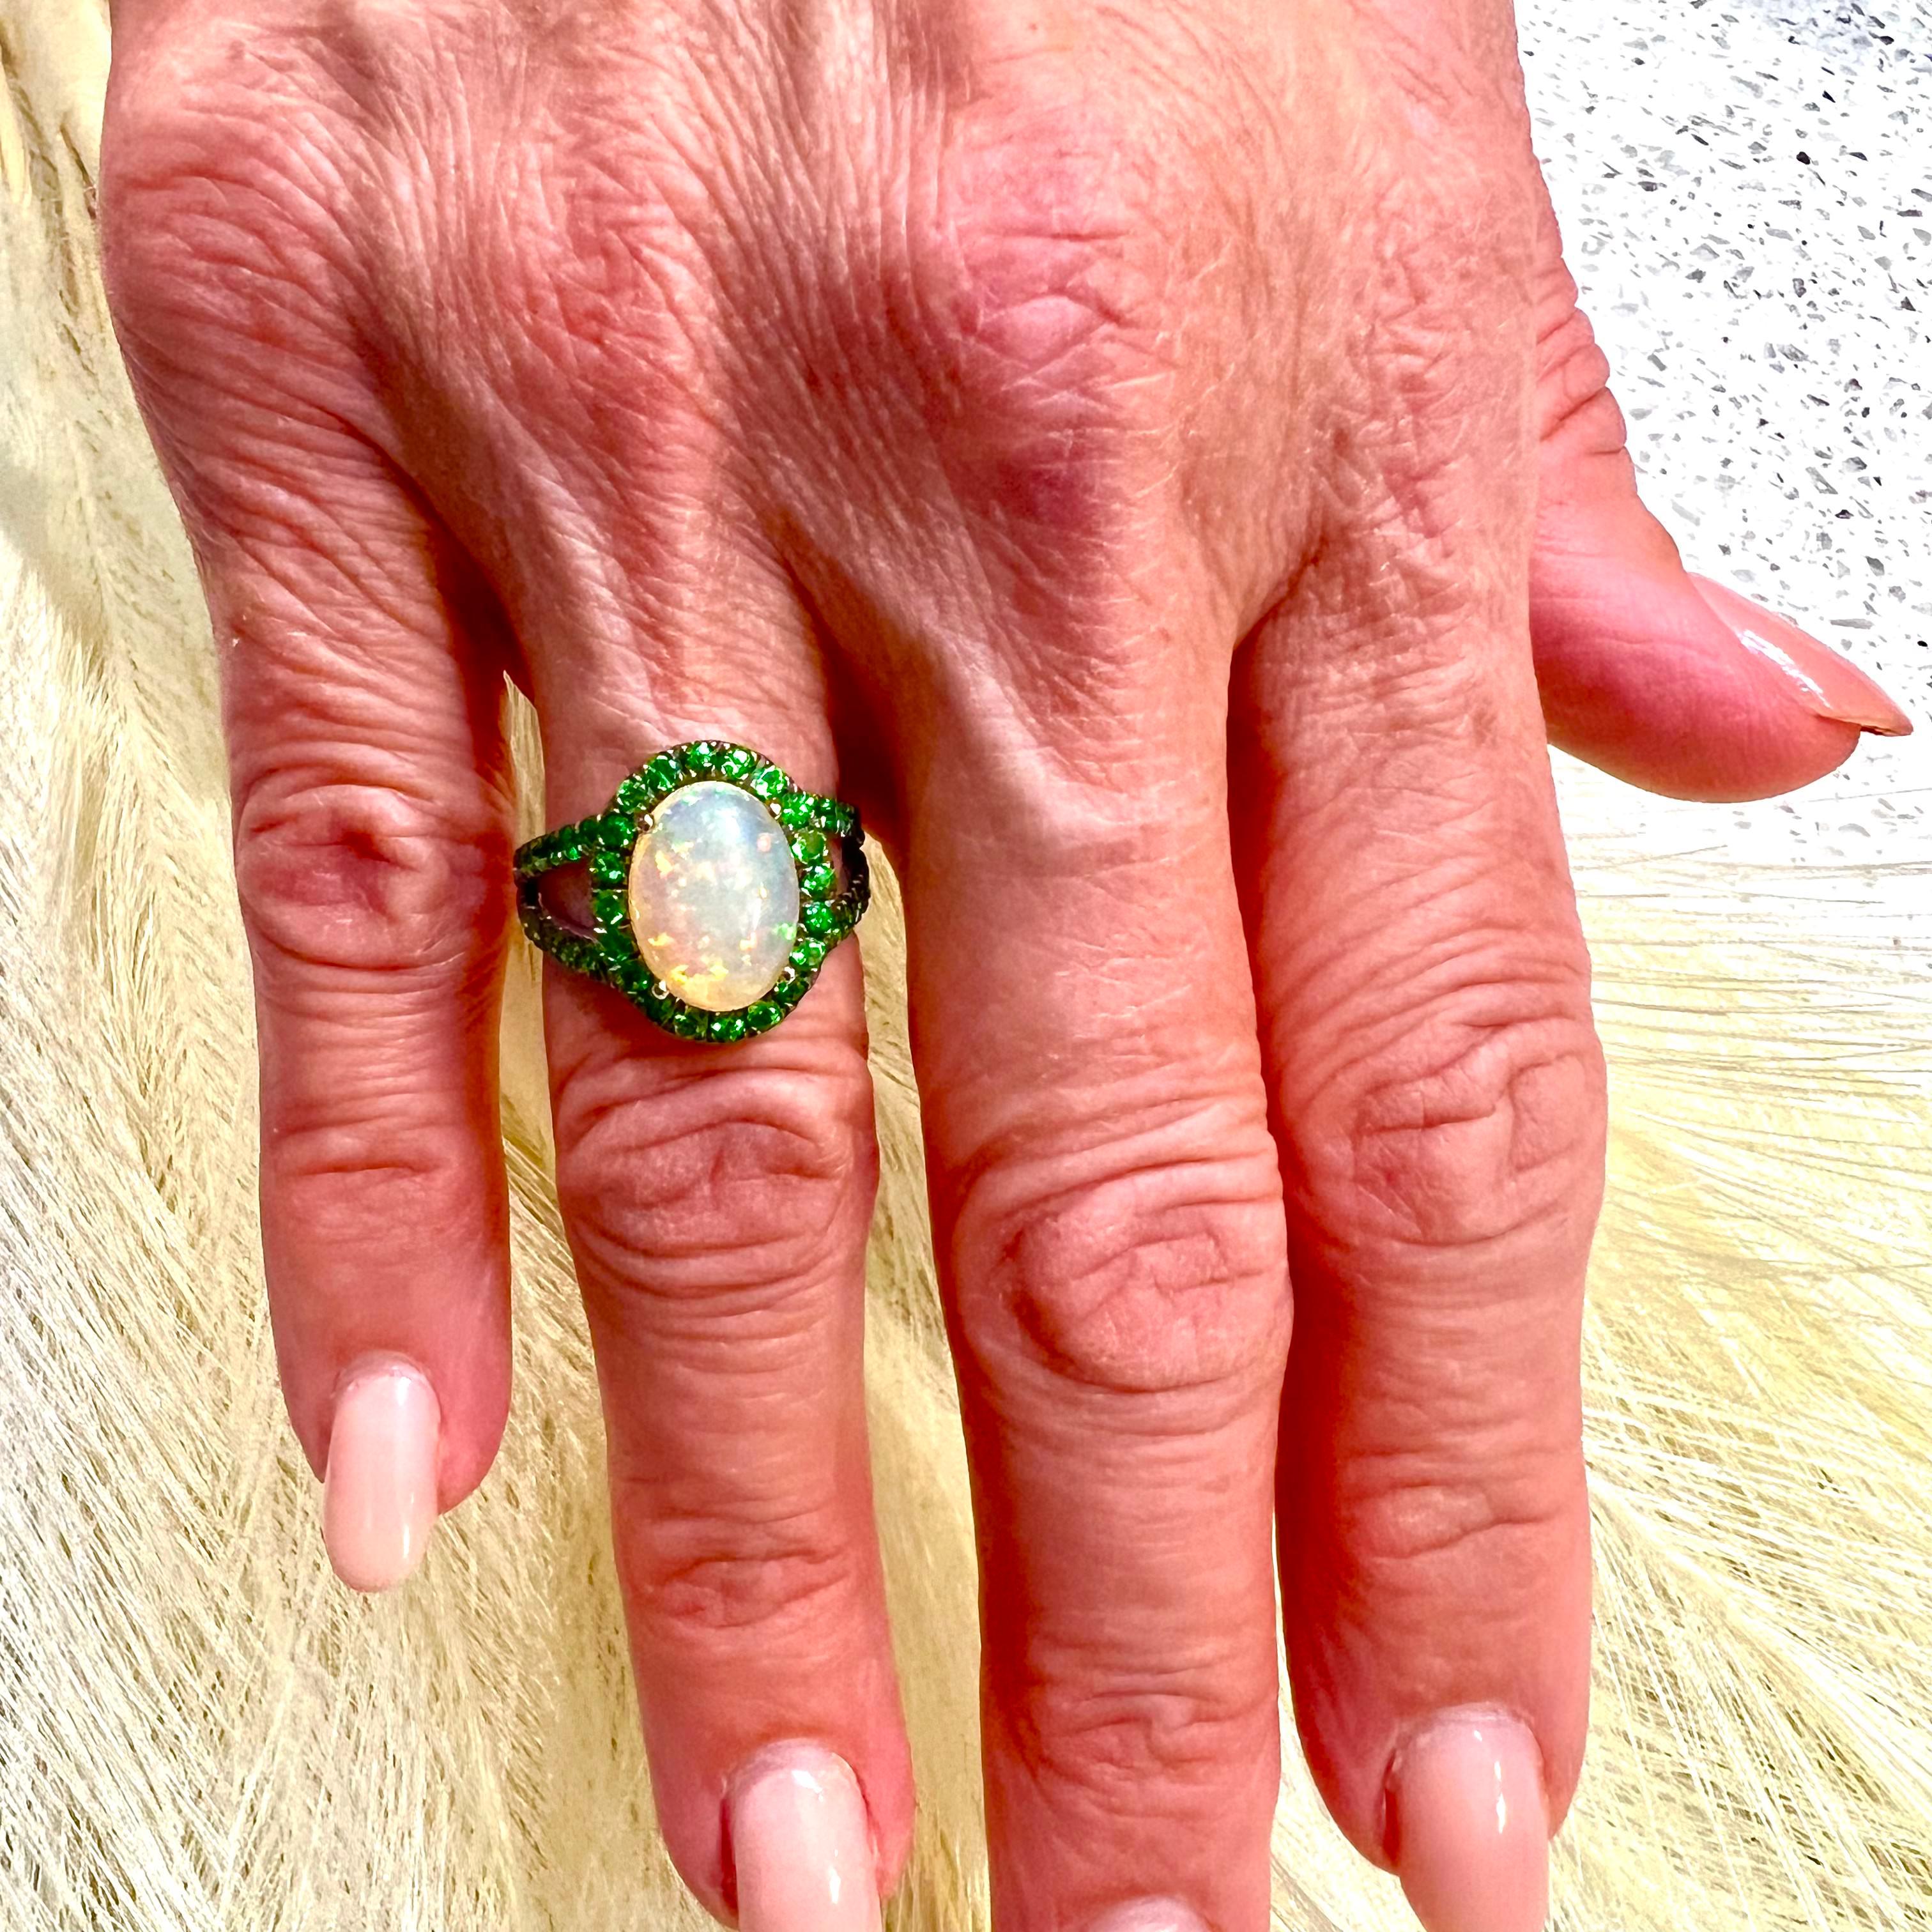 Natural Quality Opal Tsavorite Ring Size 7 14k Gold 5.66 TCW Certified $5,950 300686

This is a one of a Kind Unique Custom Made Glamorous Piece of Jewelry!

Nothing says, “I Love you” more than Diamonds and Pearls!

This item has been Certified,